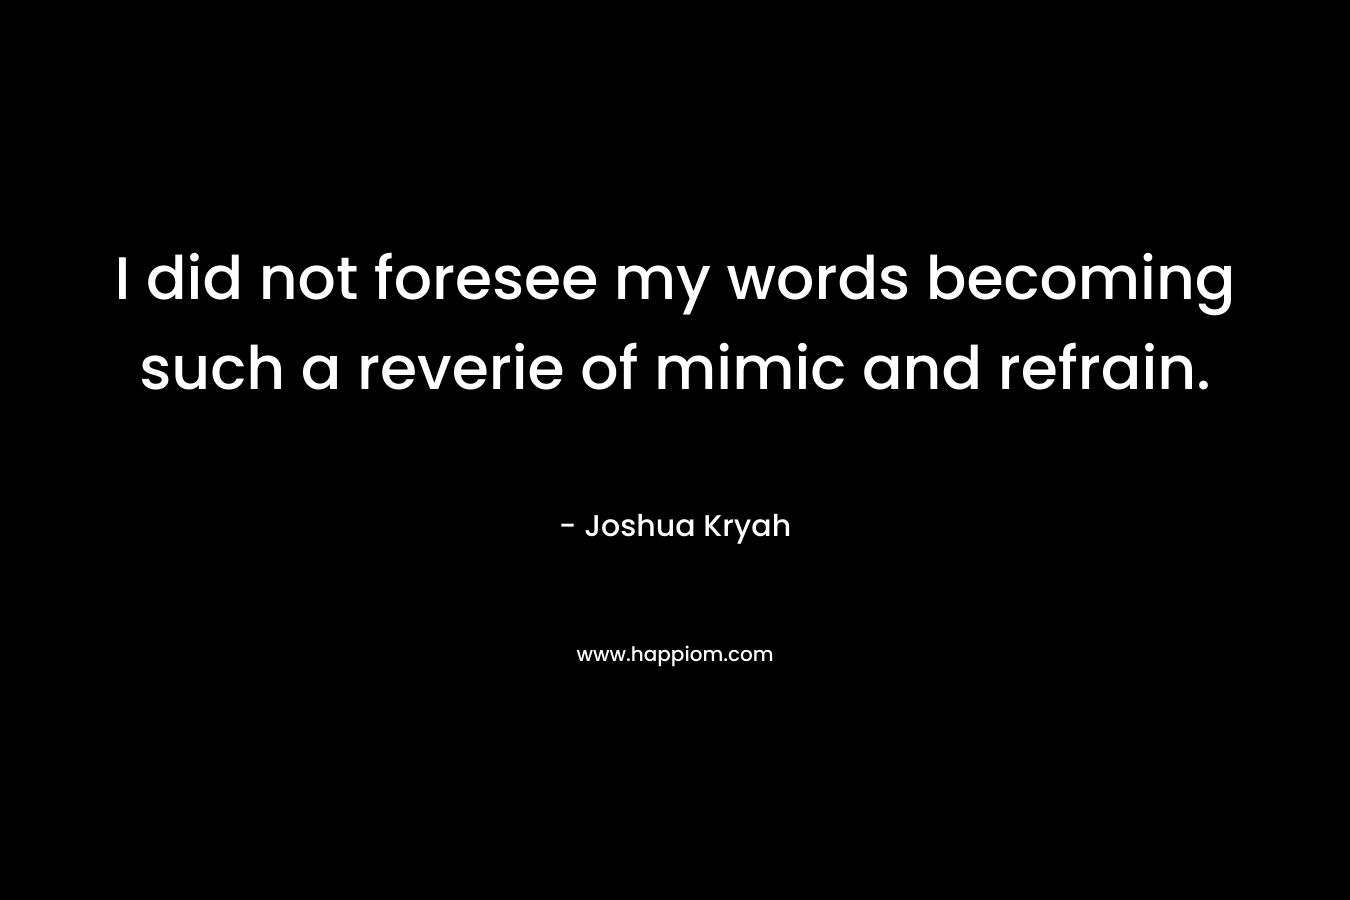 I did not foresee my words becoming such a reverie of mimic and refrain. – Joshua Kryah